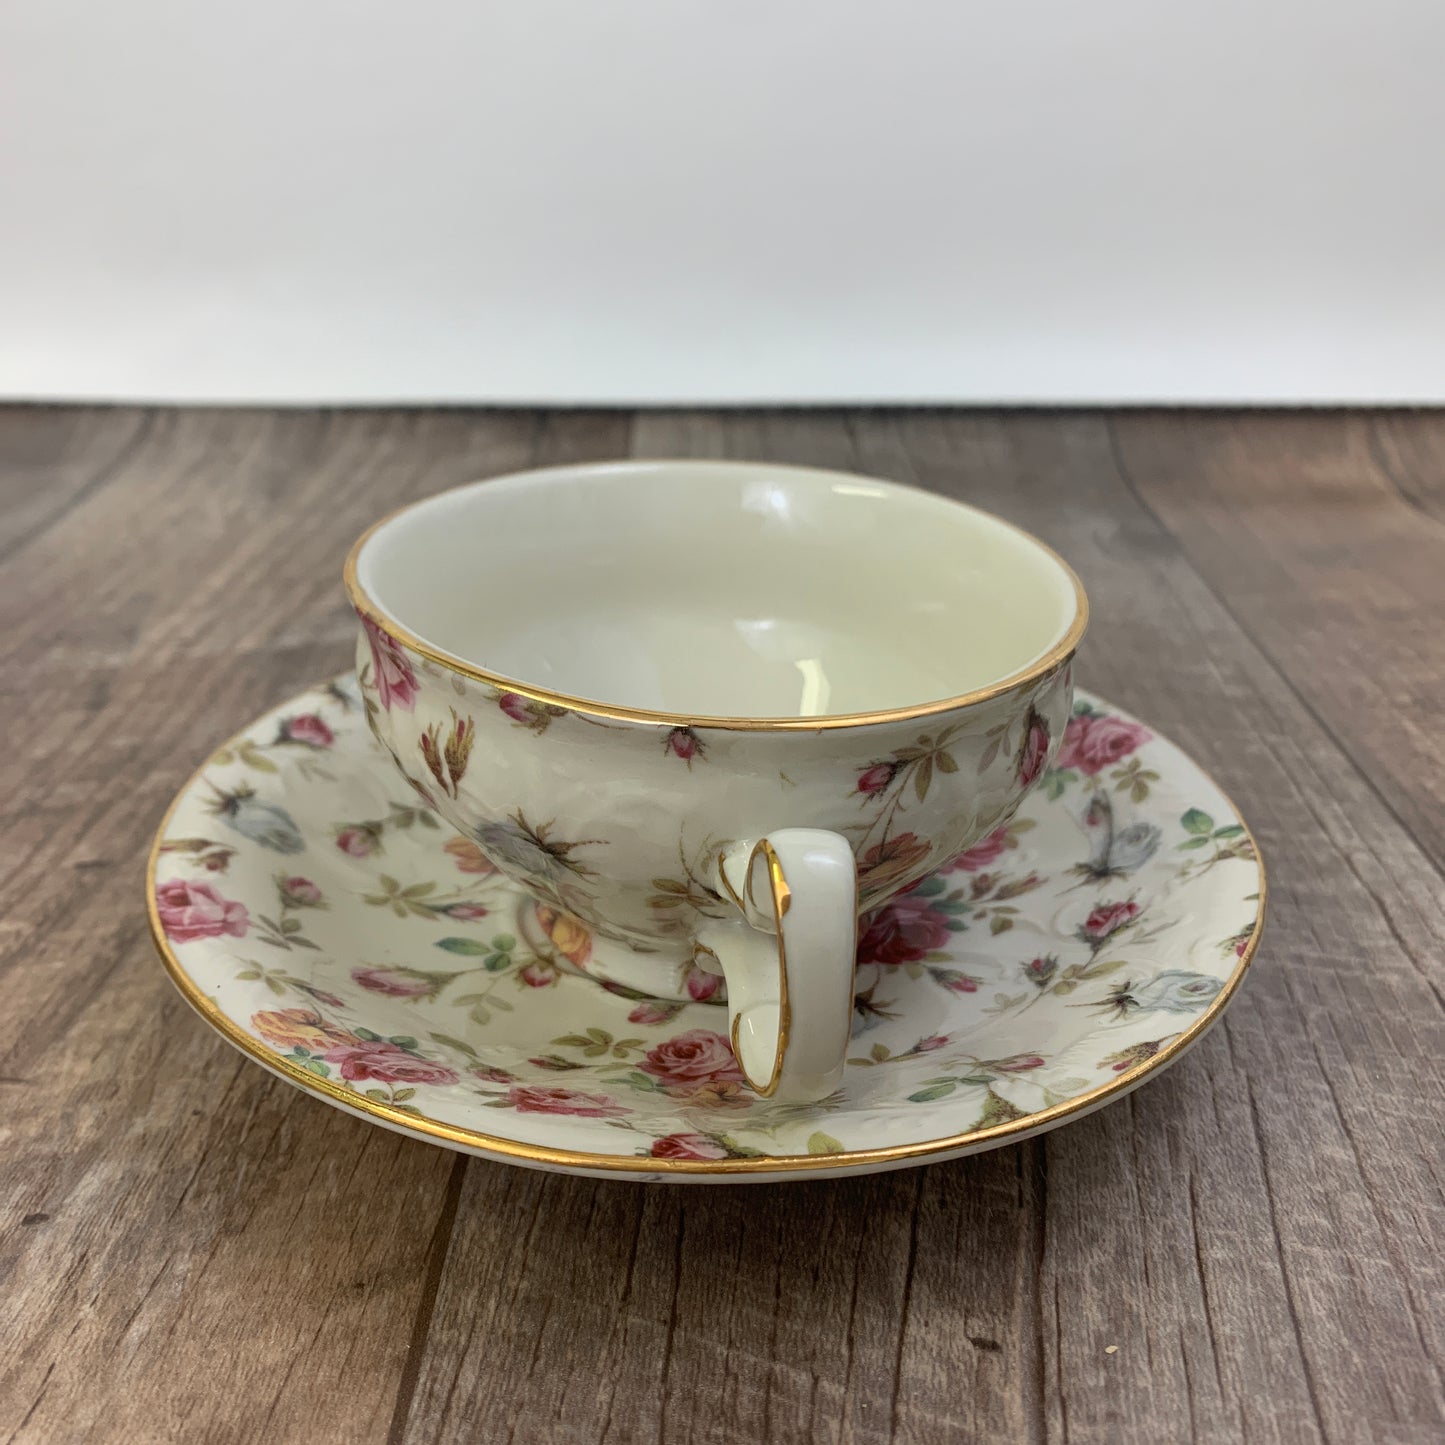 Victorian Trading Co Wide Mouth Teacup and Saucer Rose Chintz Pattern